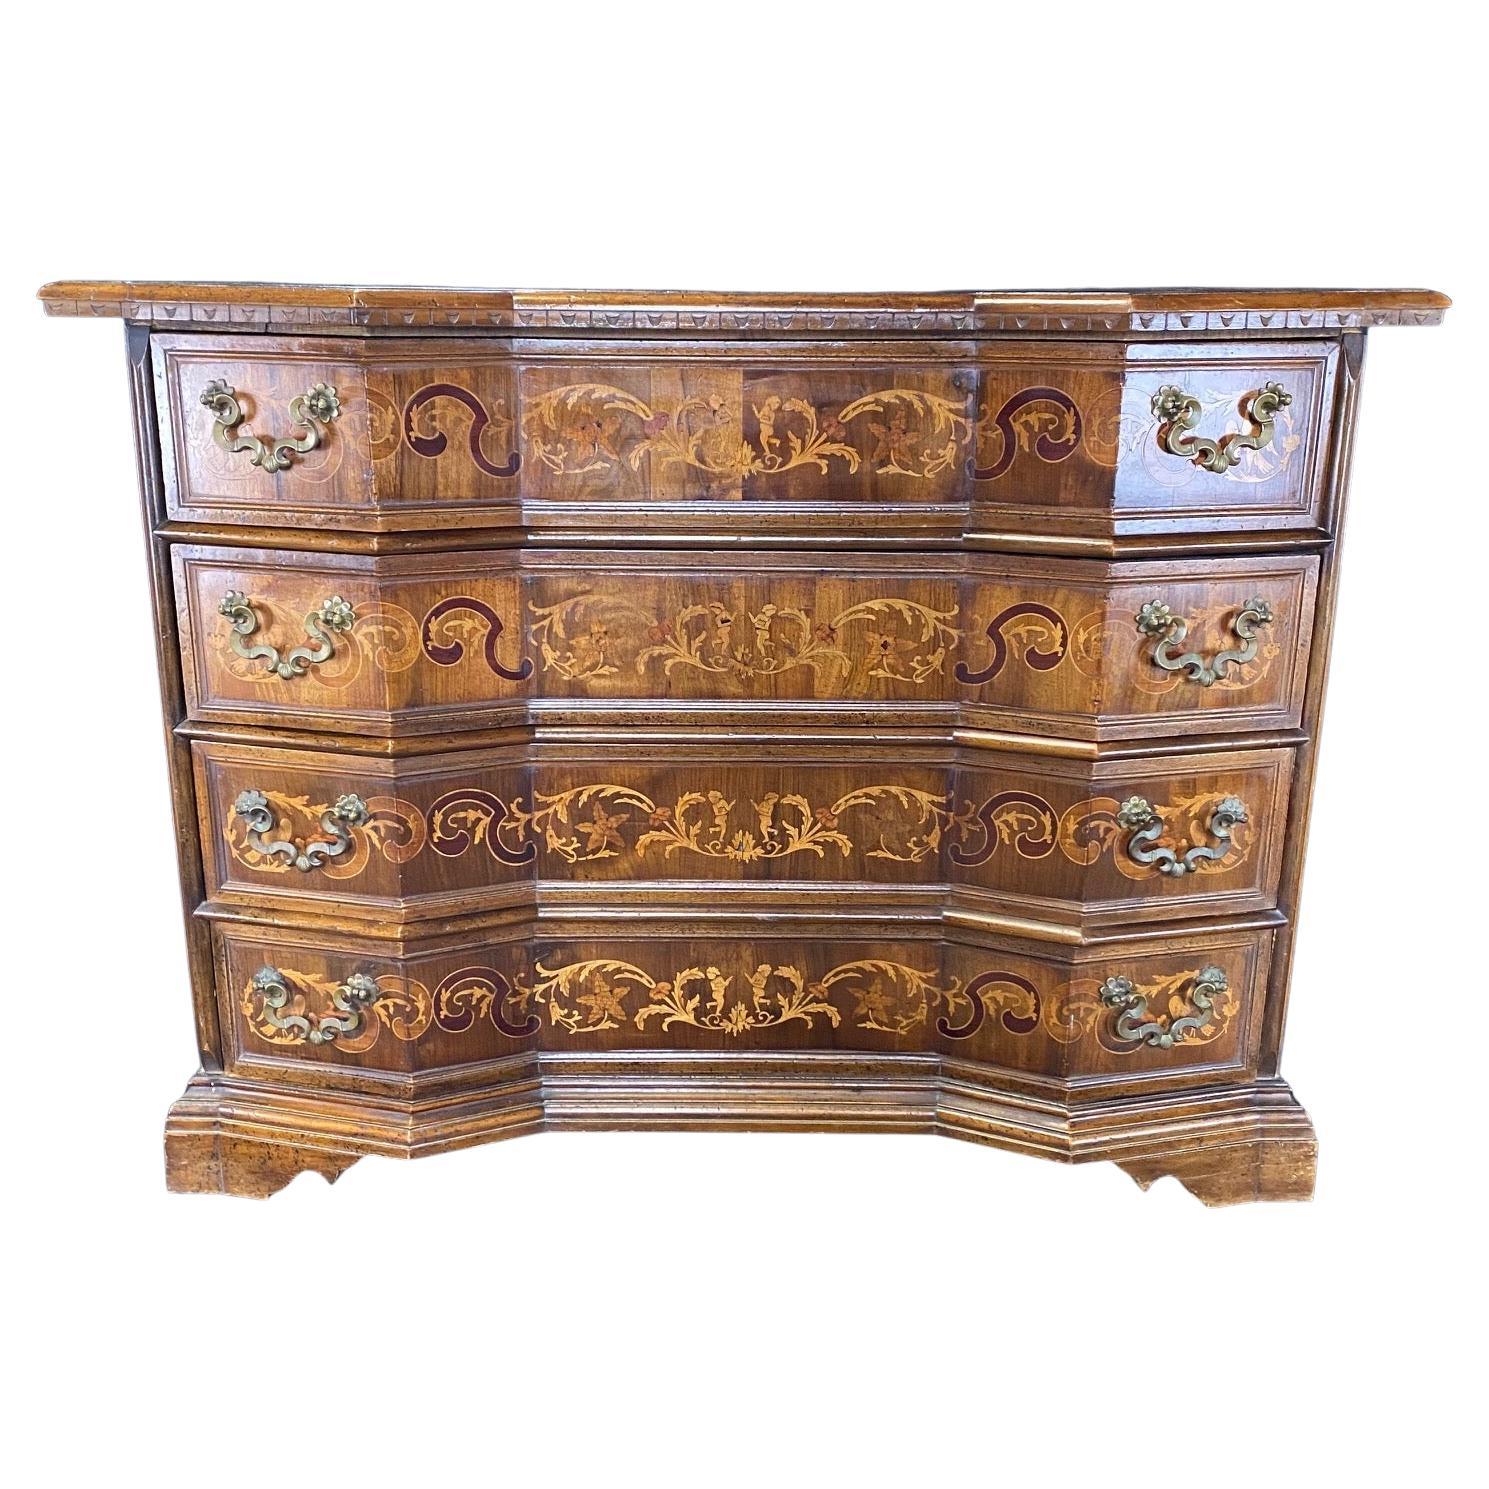 Magnificent Inlaid Mixed Wood Italian Serpentine Chest of Drawers